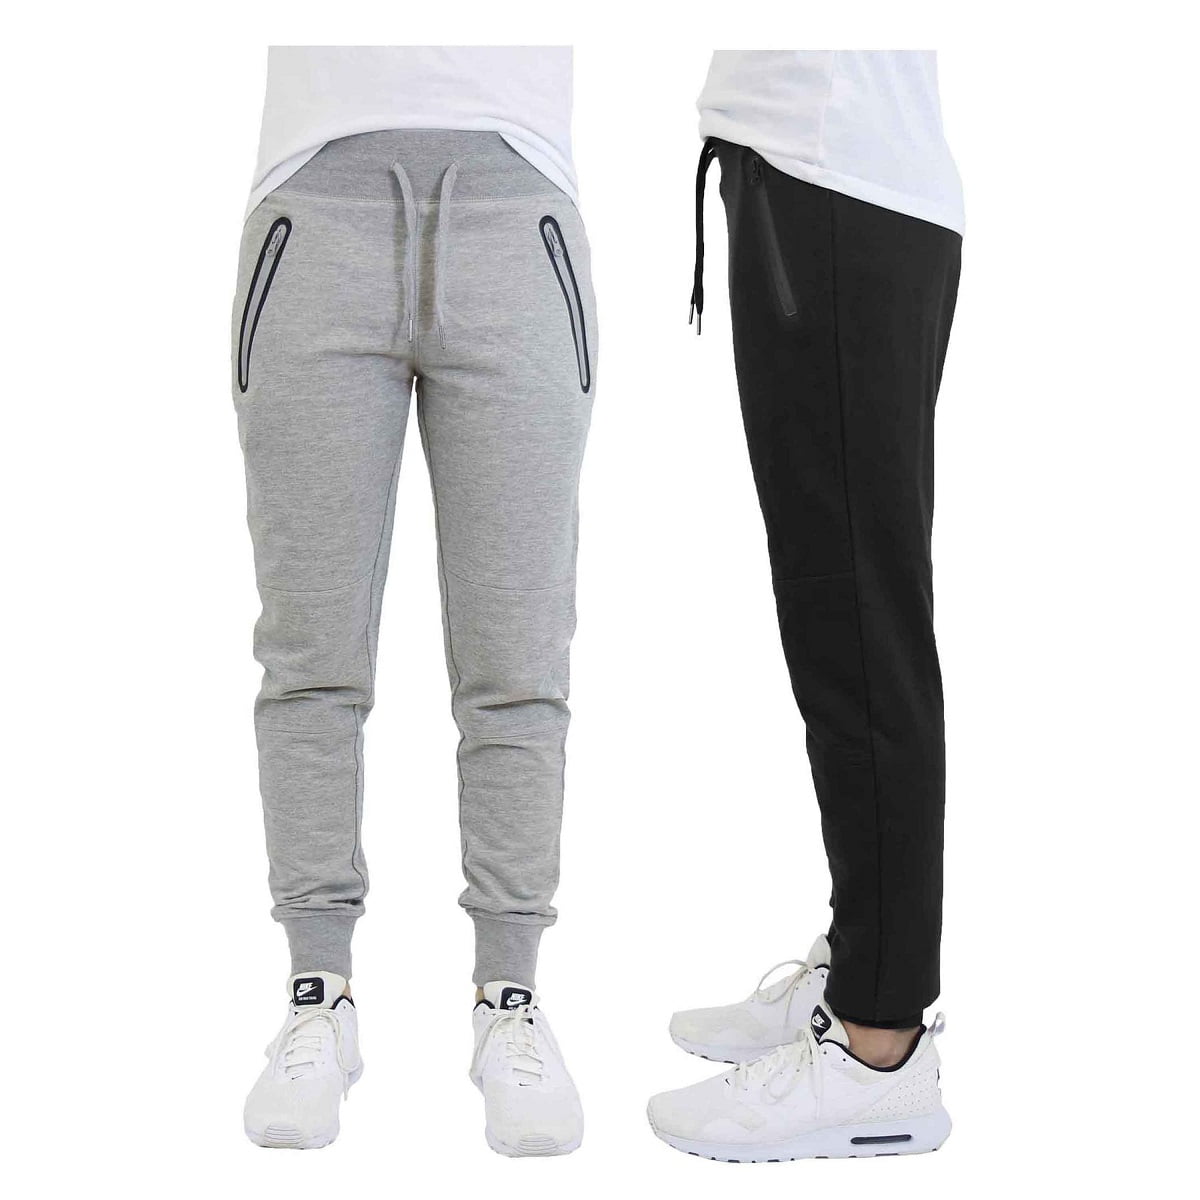 DARESAY 2 Pack of Mens French Terry Joggers Casual Active Gym Running Sweatpants with Zipper Pockets